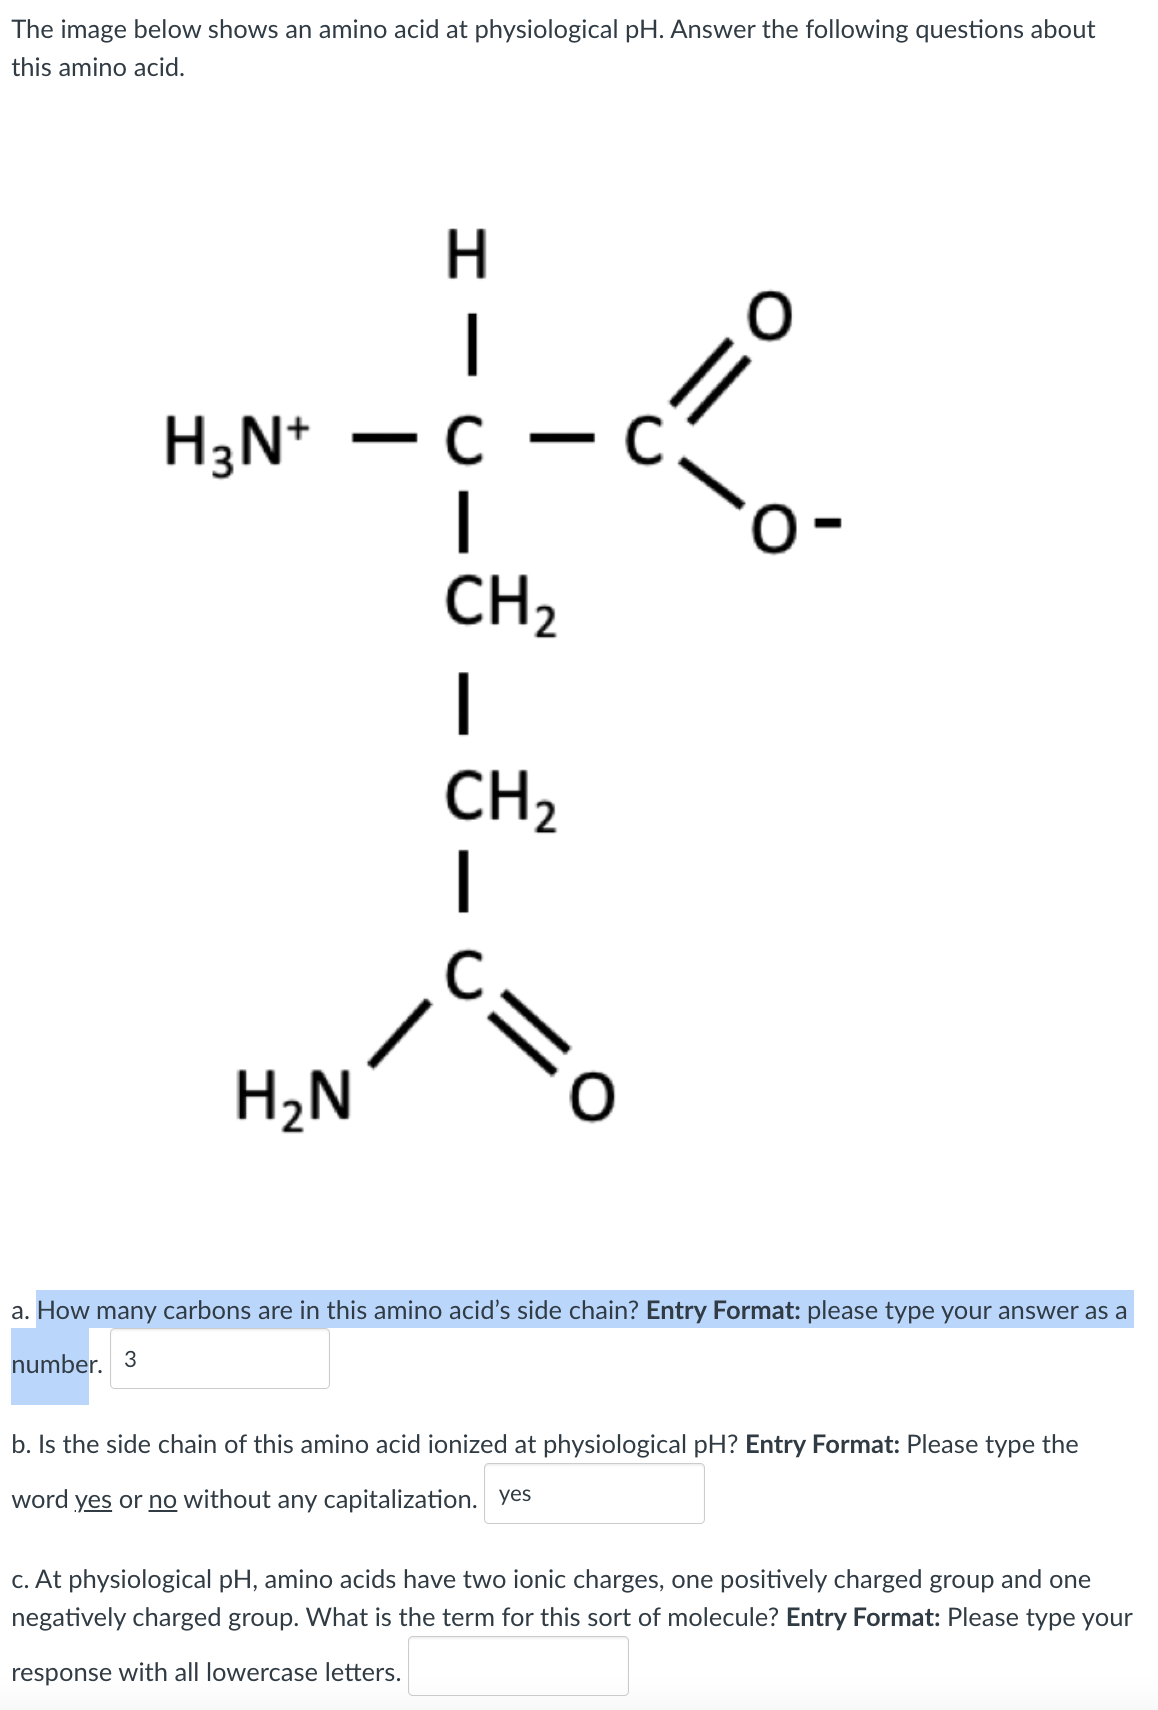 The image below shows an amino acid at physiological pH. Answer the following questions about
this amino acid.
H
|
//
- c
H3N*
|
CH2
CH2
|
H2N
a. How many carbons are in this amino acid's side chain? Entry Format: please type your answer as a
number. 3
b. Is the side chain of this amino acid ionized at physiological pH? Entry Format: Please type the
word yes or no without any capitalization. yes
c. At physiological pH, amino acids have two ionic charges, one positively charged group and one
negatively charged group. What is the term for this sort of molecule? Entry Format: Please type your
response with all lowercase letters.
